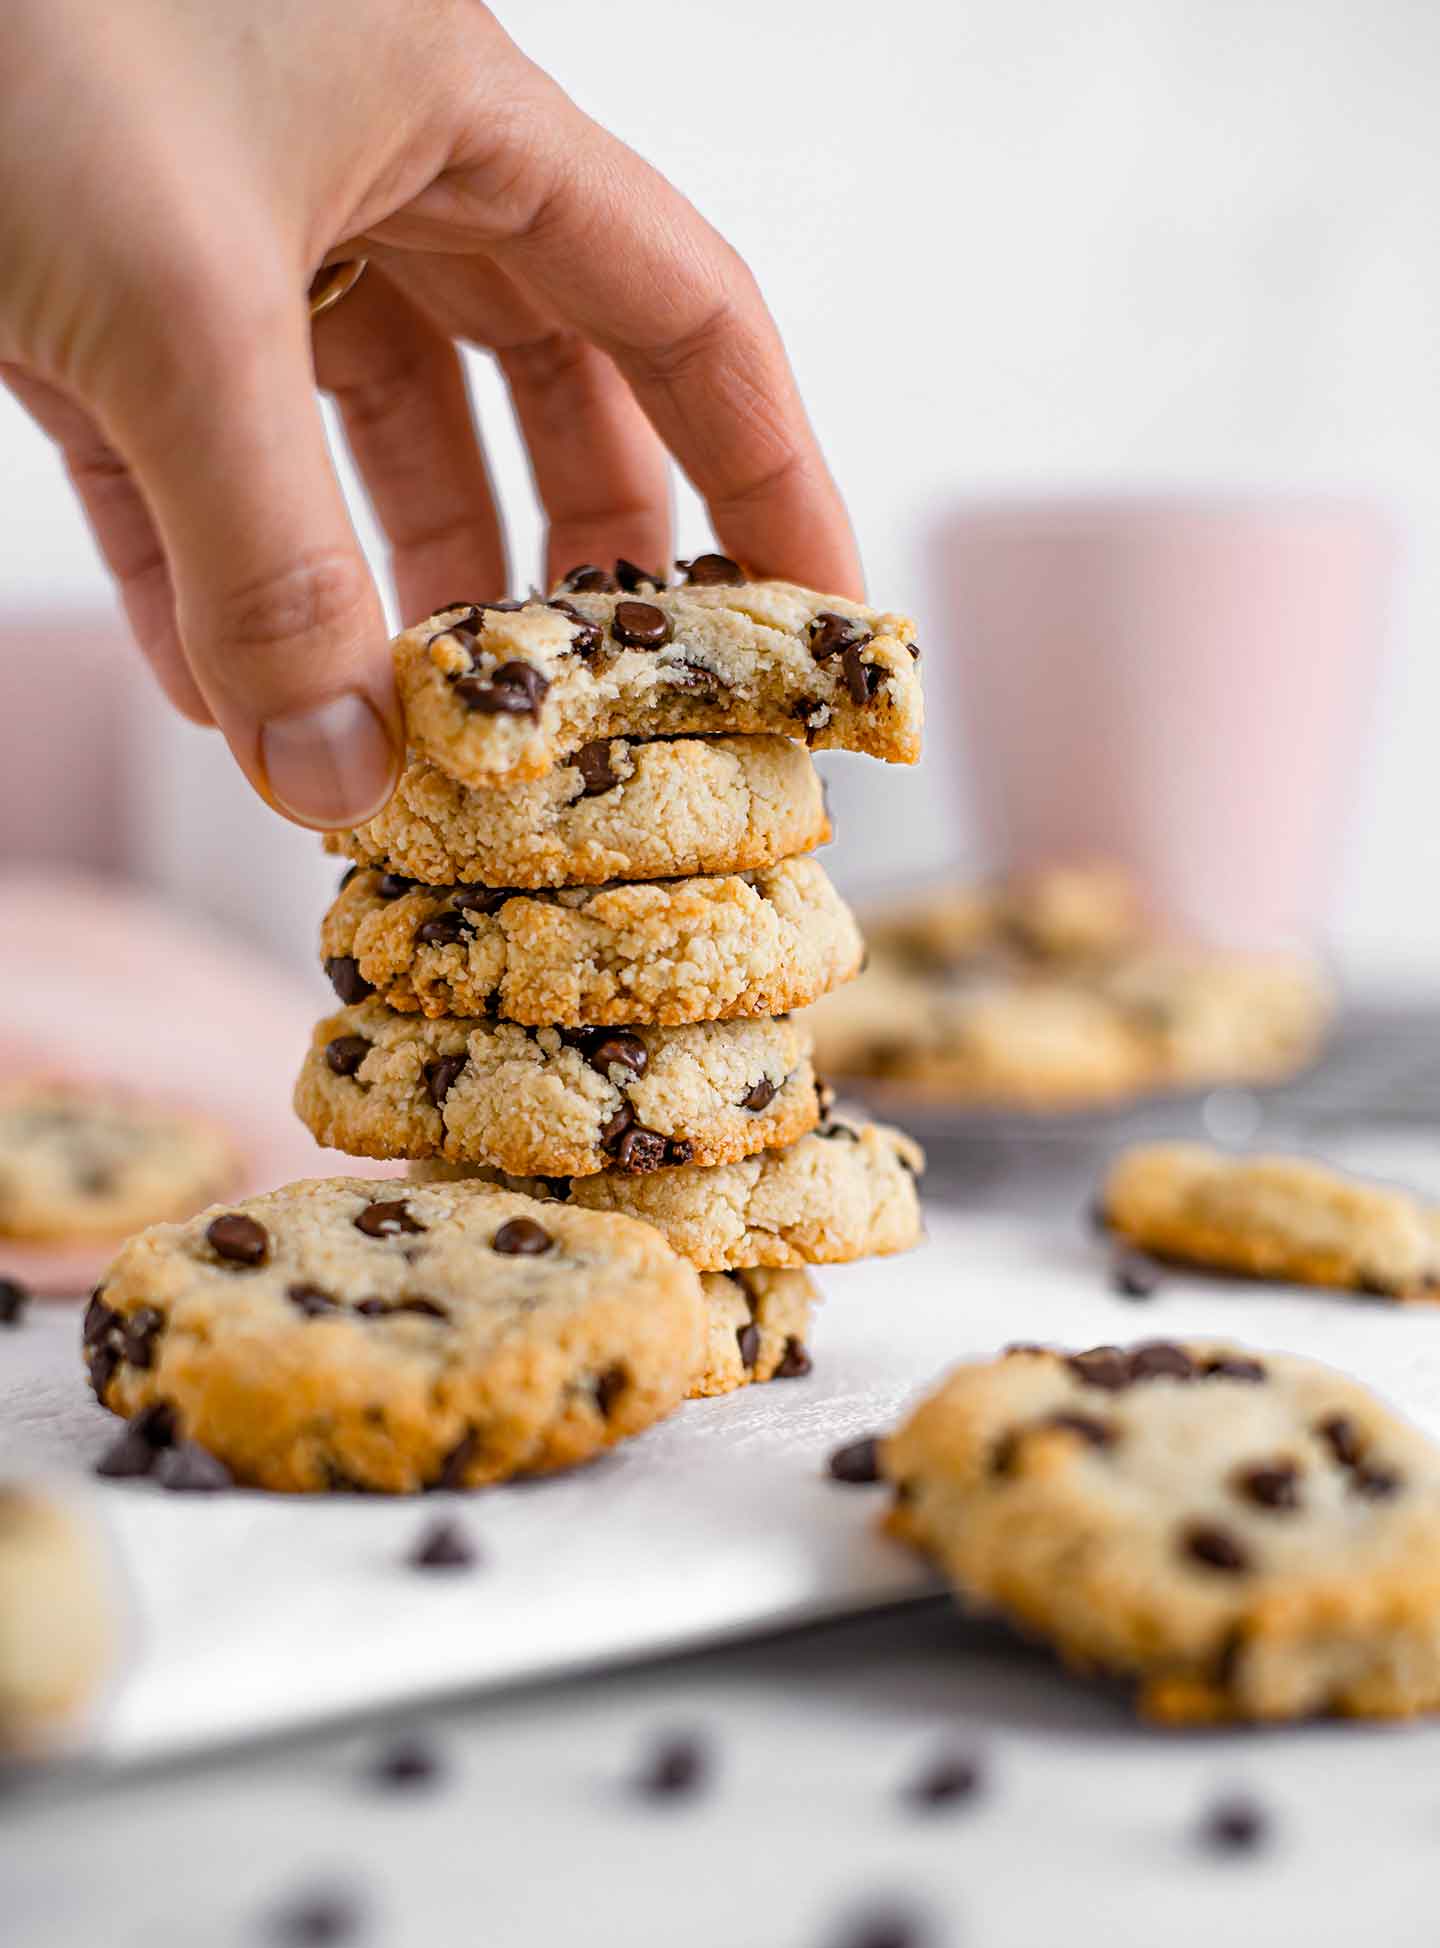 A hand grabs the top cookie off a stack. The cookie has a bite taken out and is filled with chocolate chips. Pink mugs fill the background and more cookies are scattered around.